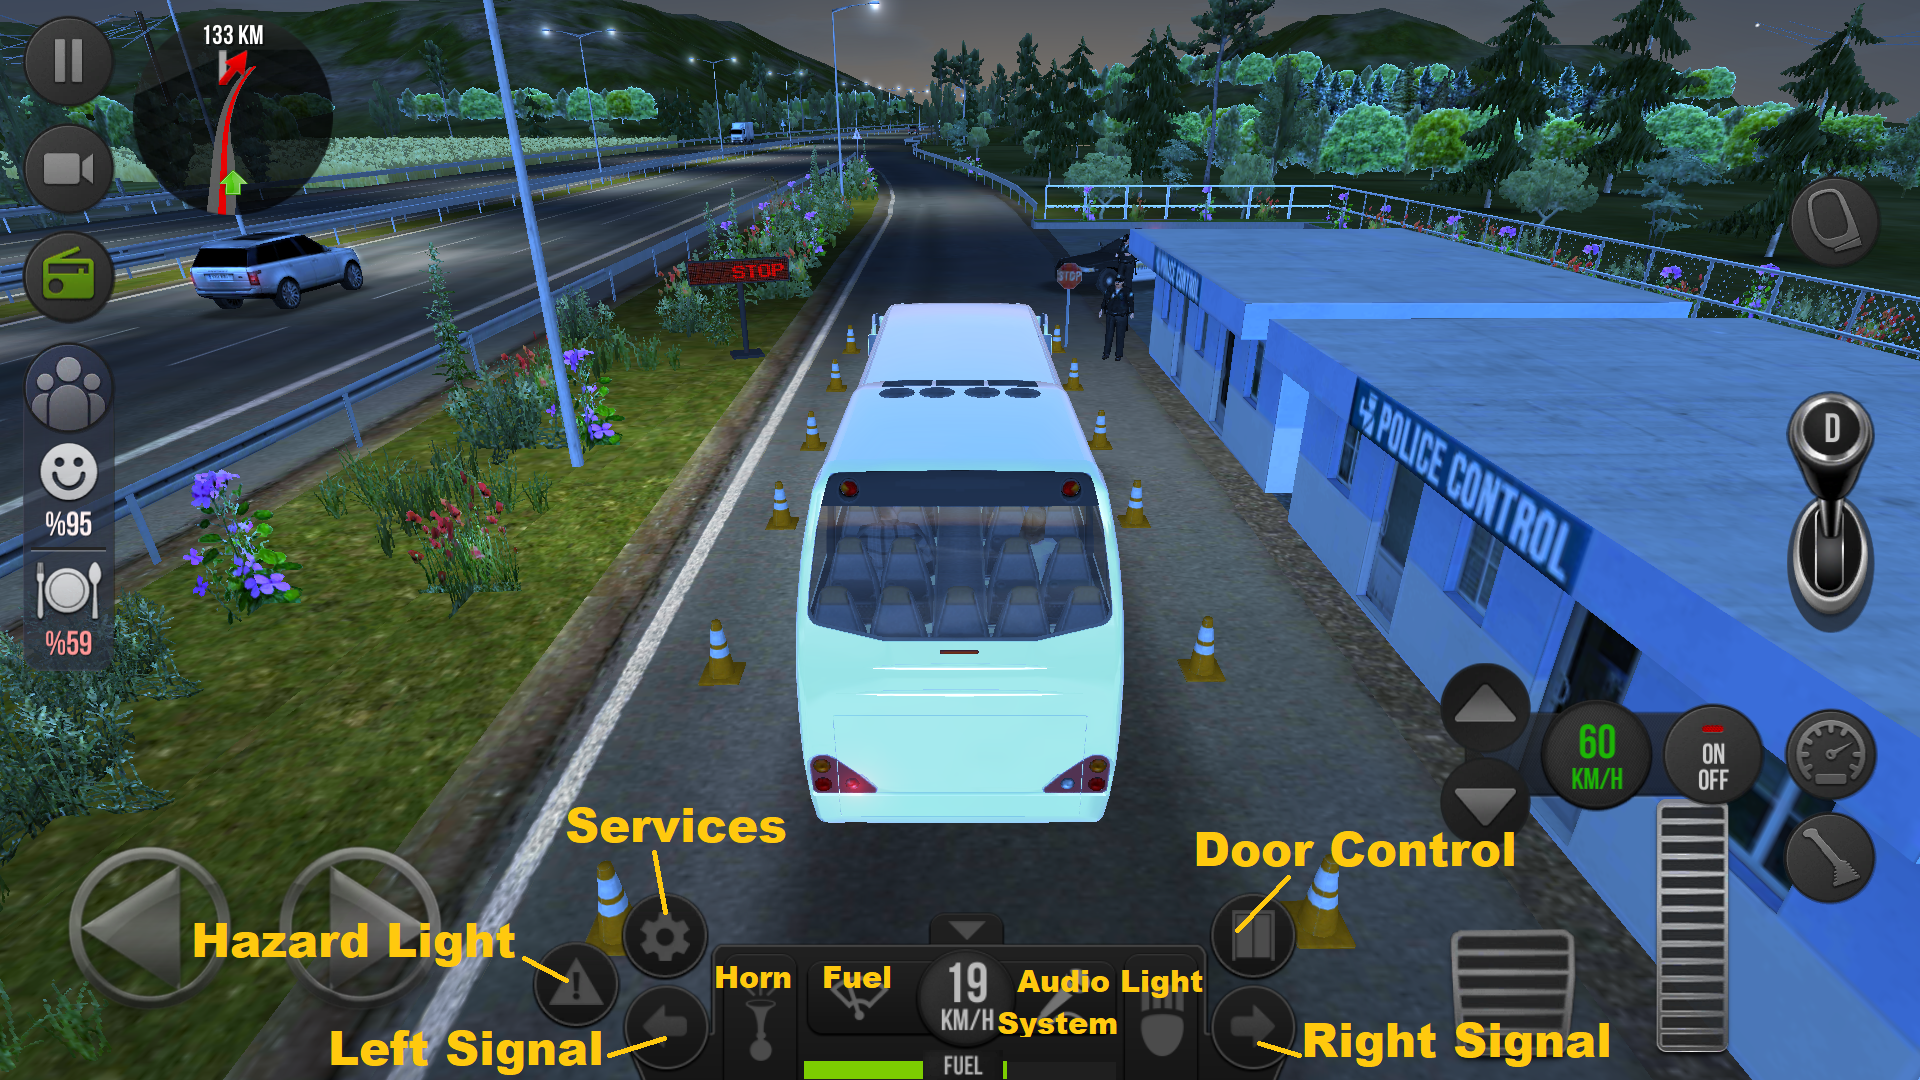 What Are The Buttons Around The Control Panel Bus Simulator Ultimate Guide And Tips